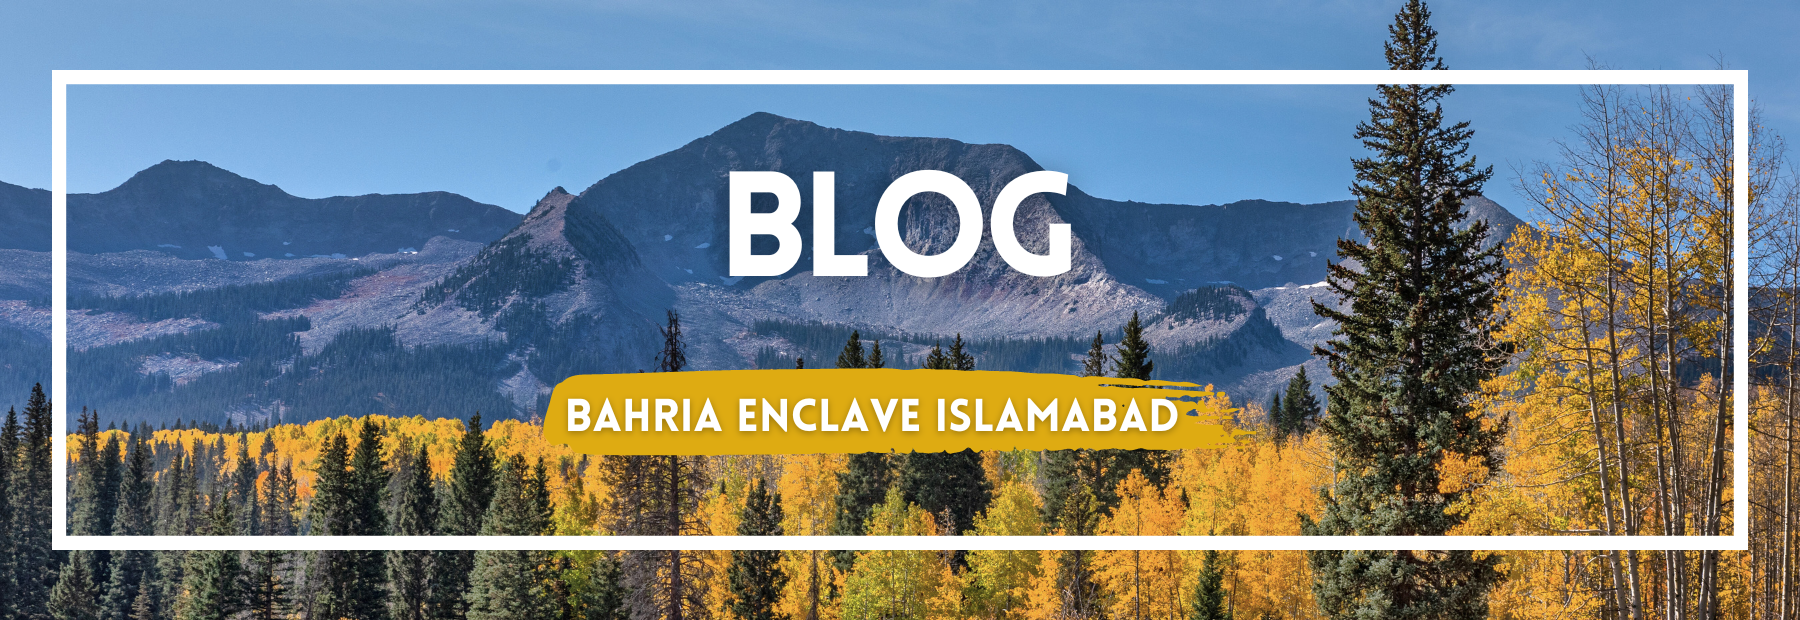 bahria enclave islamabad blogs